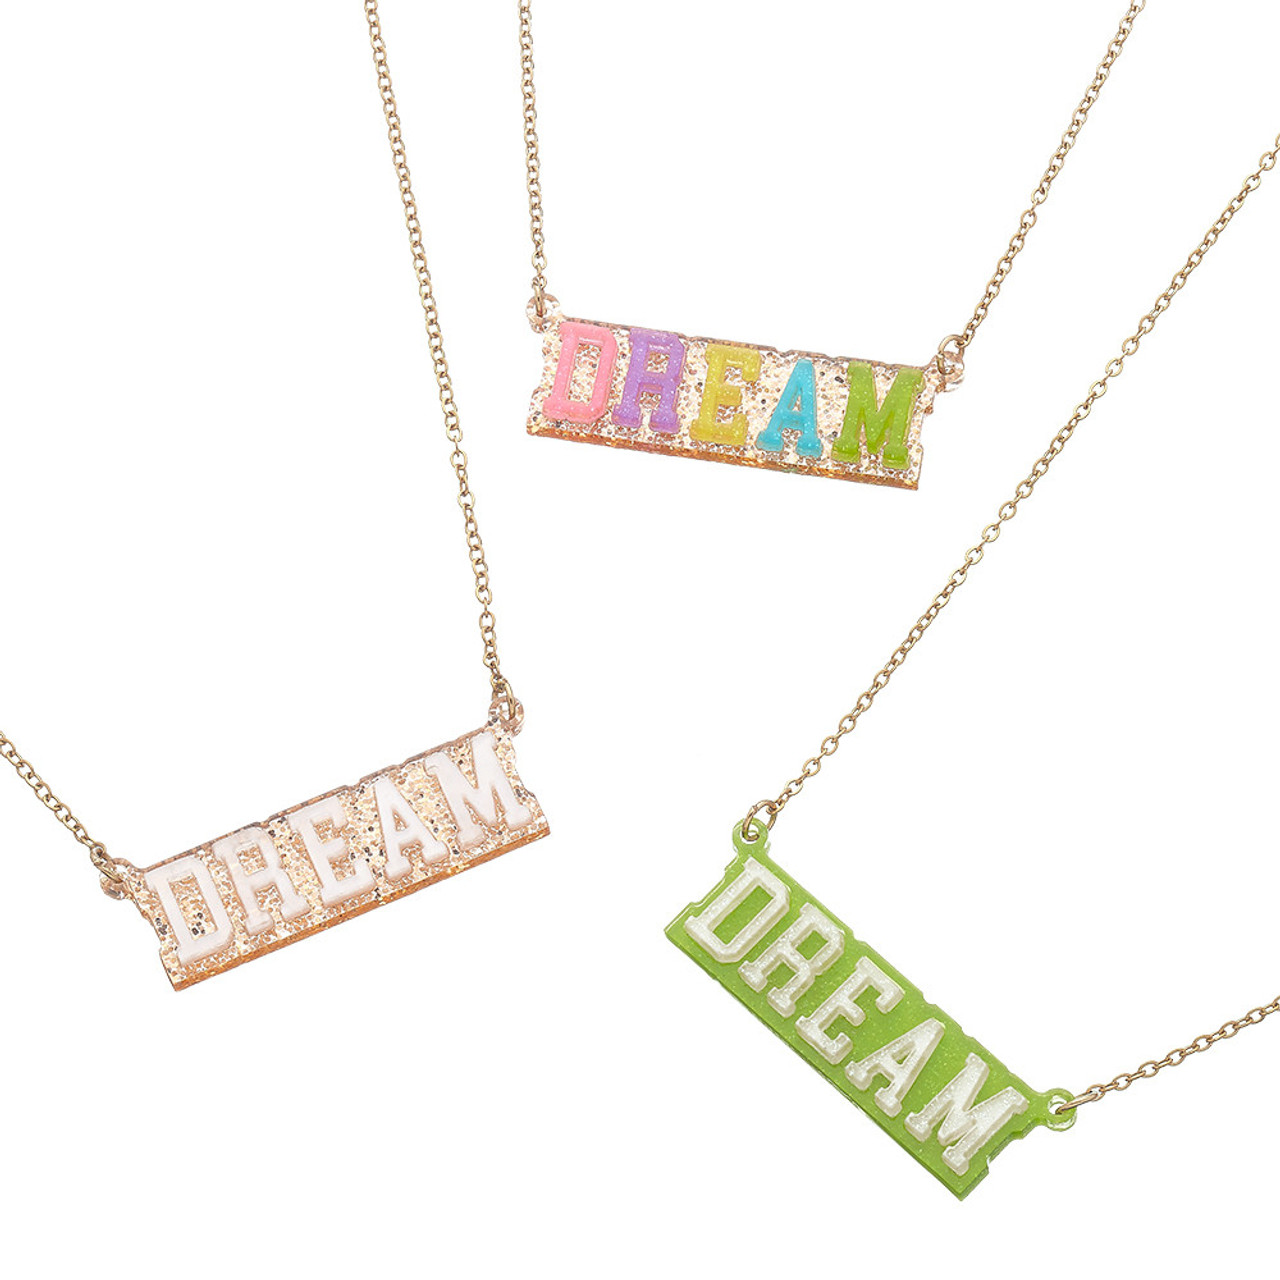 Top Trenz trendy gold chain charm necklace variety pack with different acrylic word charms